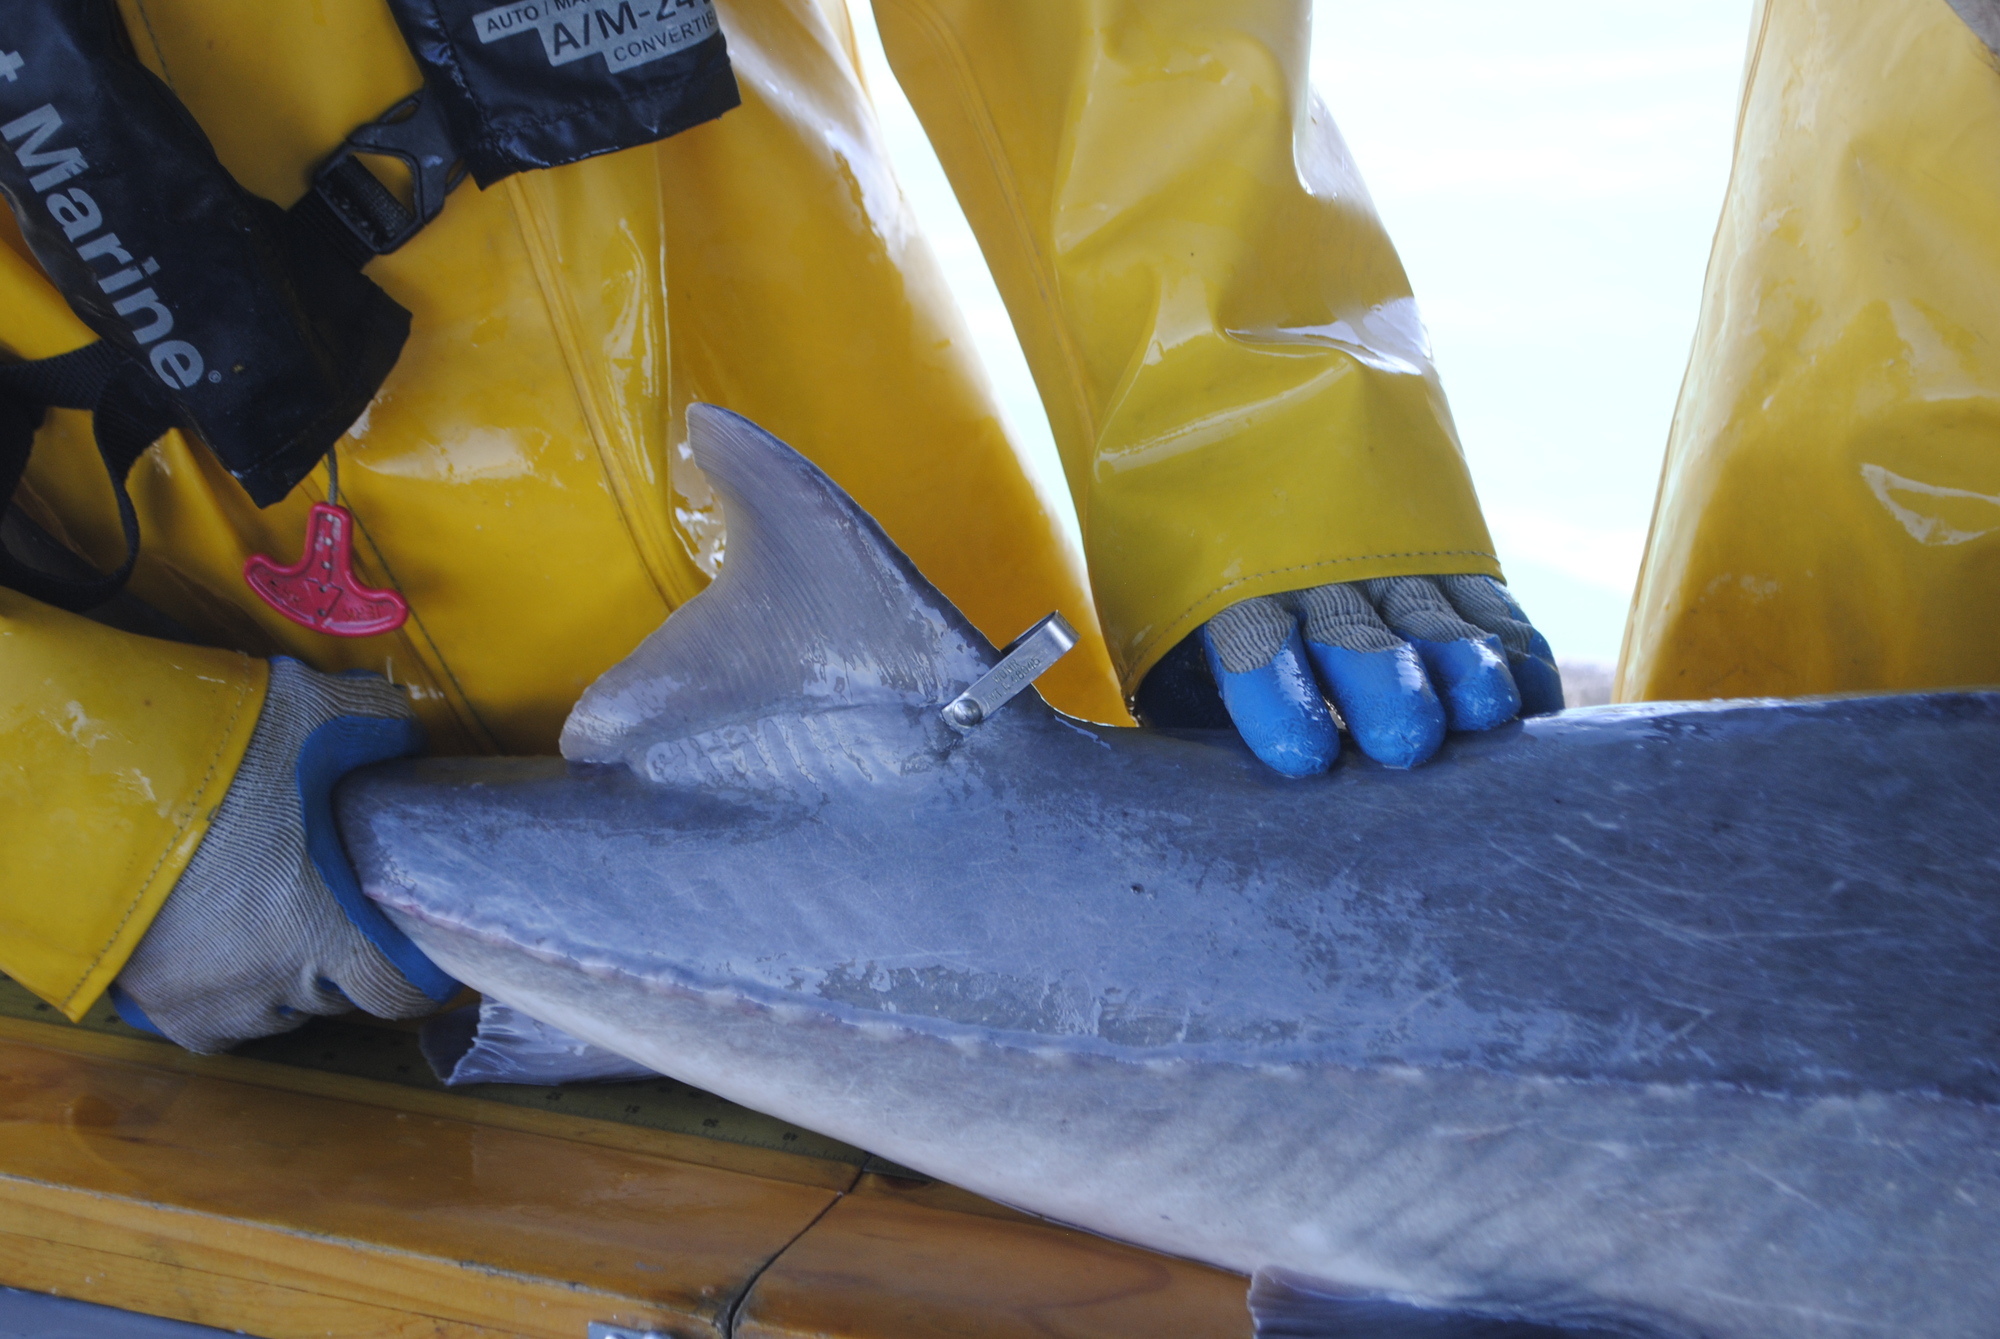 Large sturgeon are tagged on the dorsal fin.